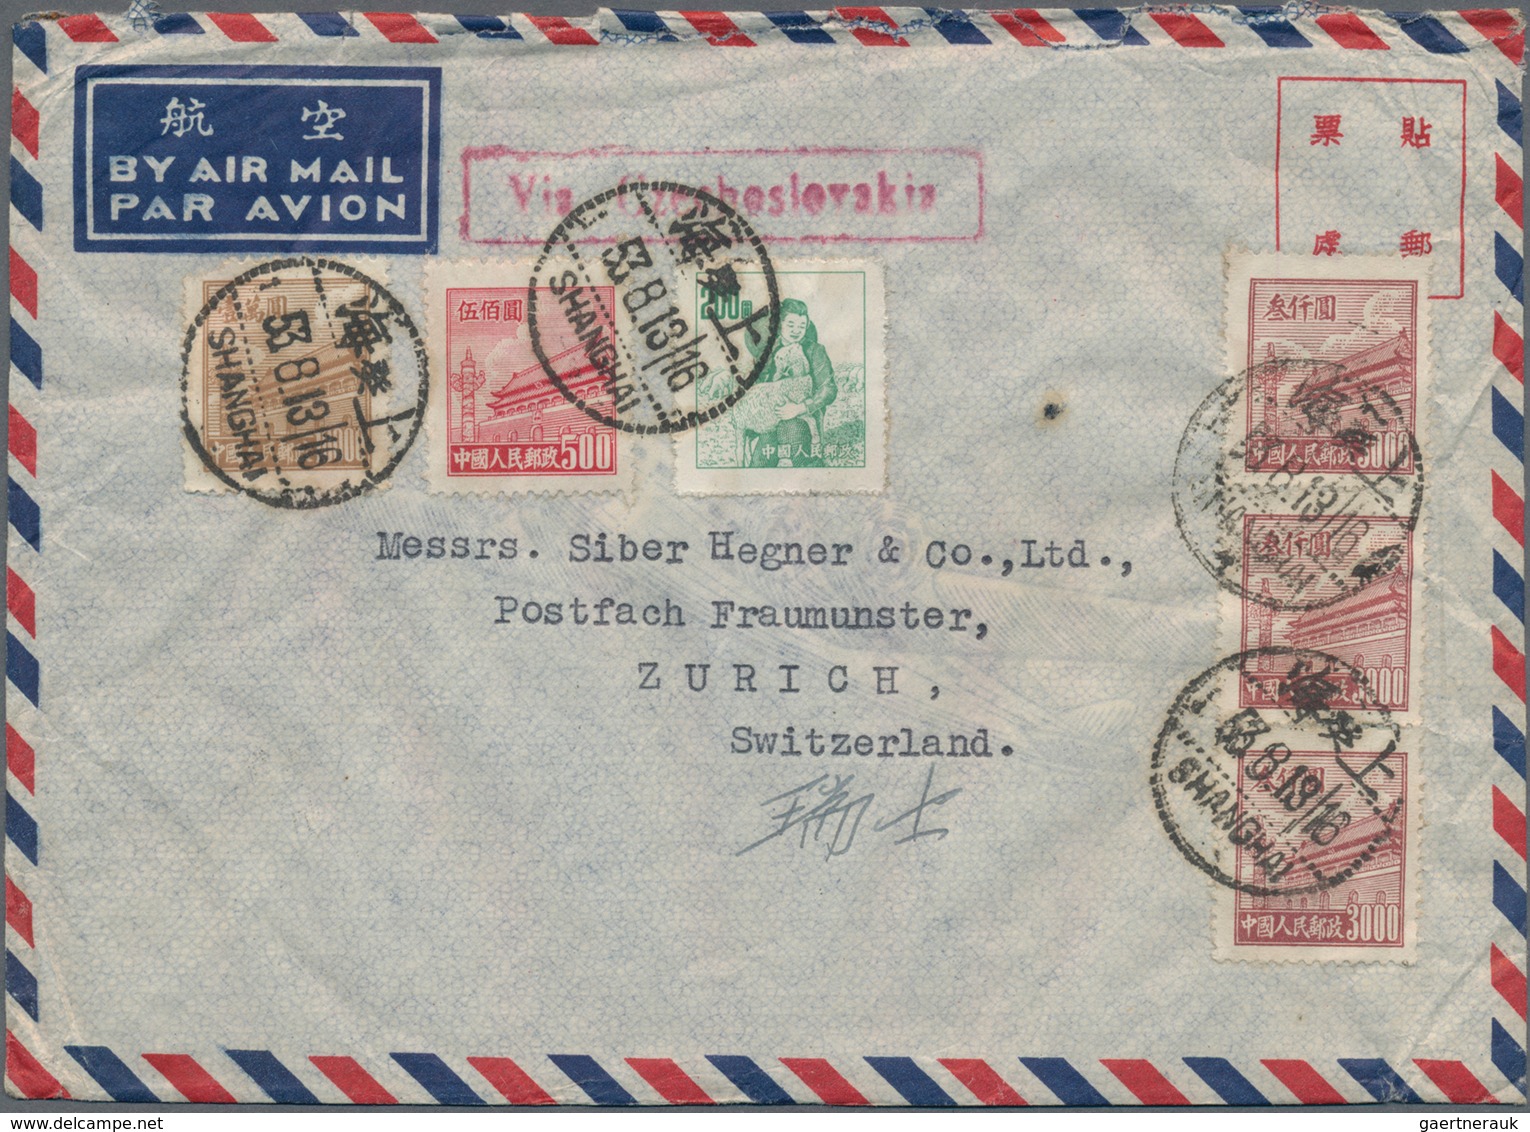 China - Volksrepublik: 1950/51, Tien AnMen issues up to $20.000 on covers (airmails x6 + surface fro